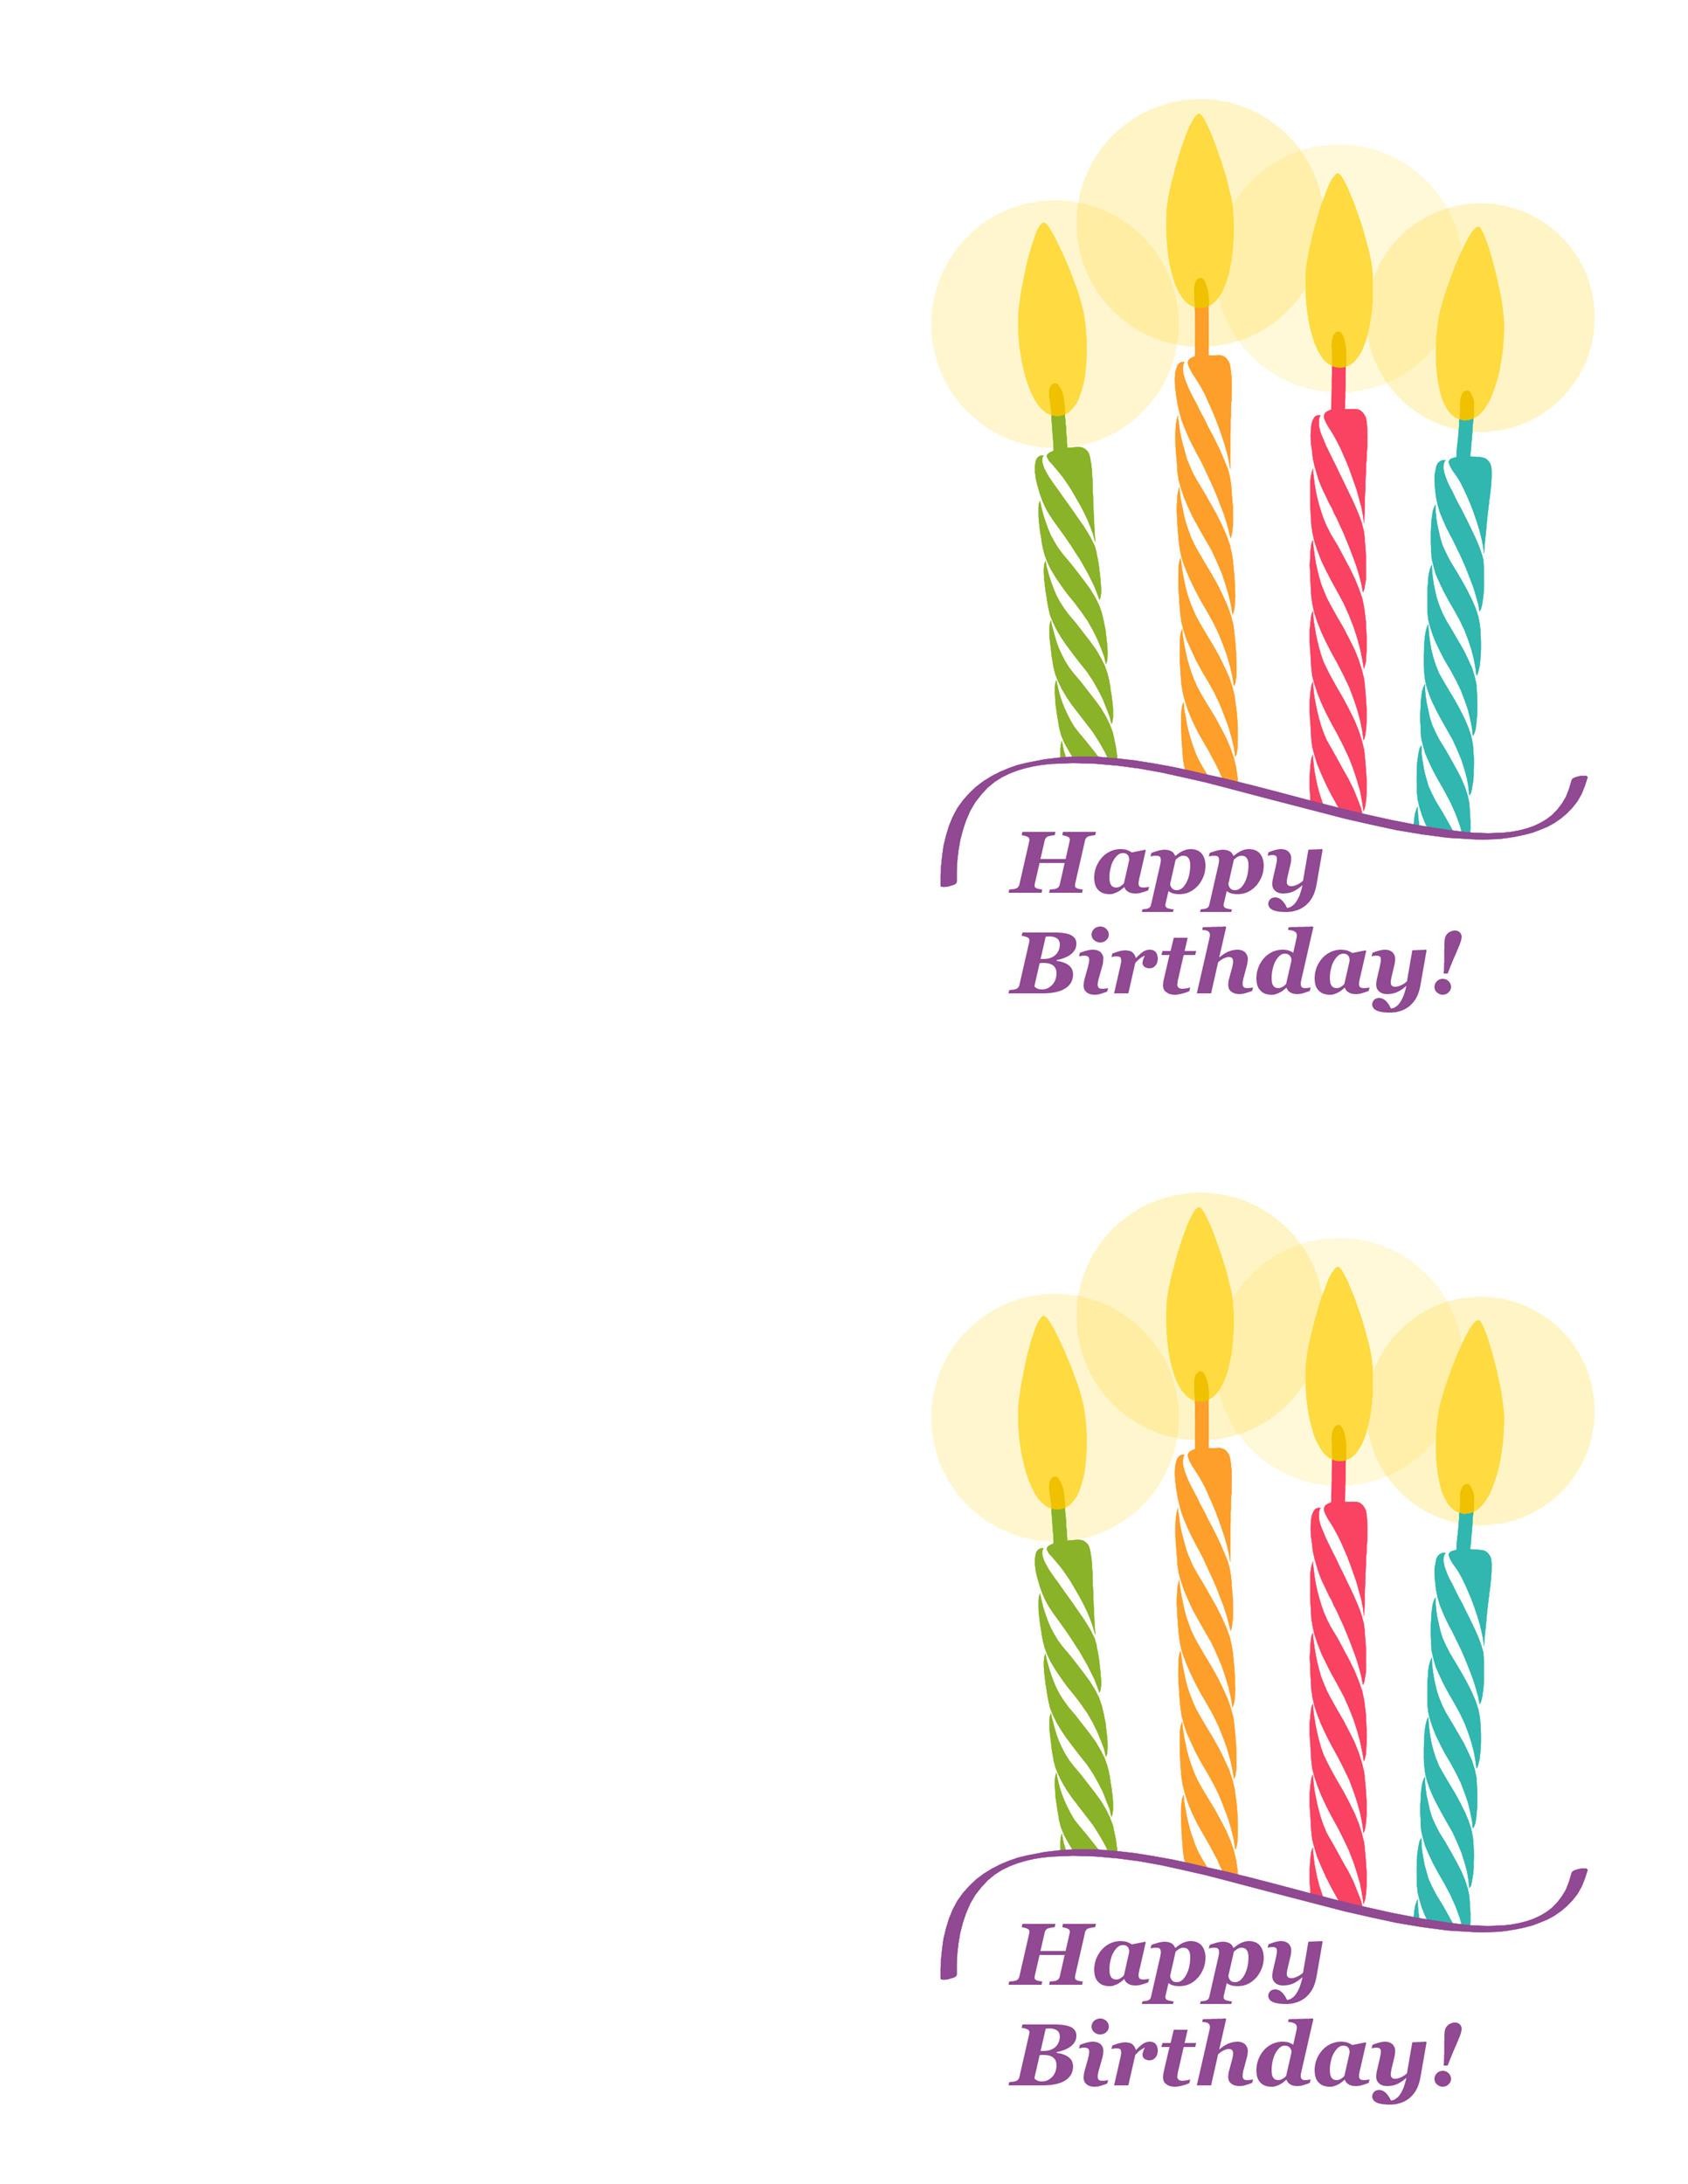 the-22-best-ideas-for-microsoft-word-birthday-card-template-home